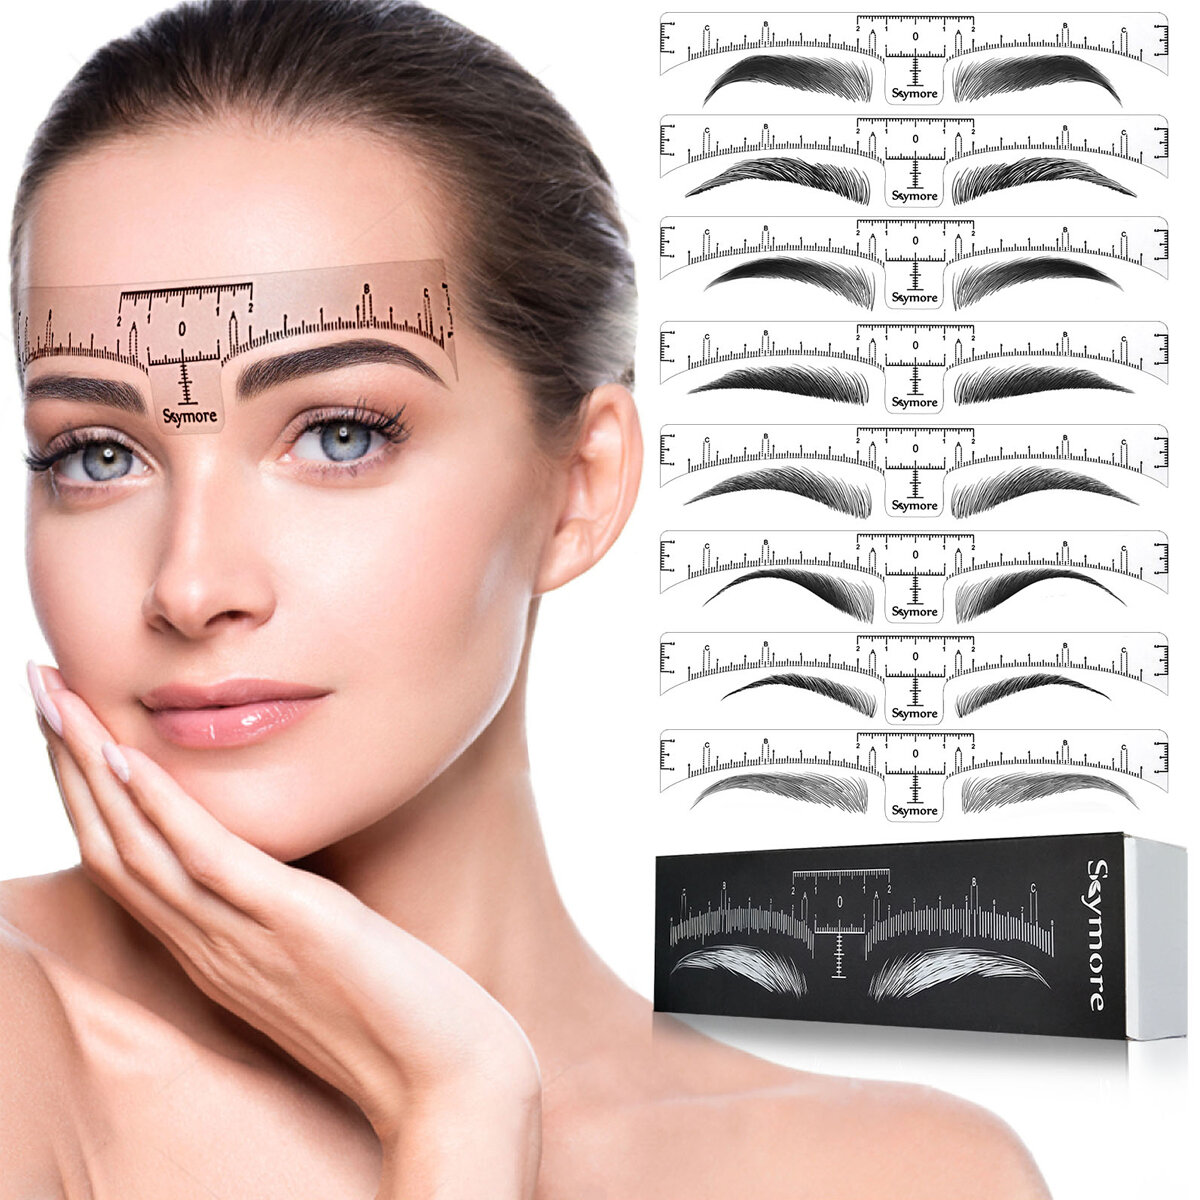 100PCS Eyebrow Stencil One-time Eyebrow Grooming Stencil Measure Ruler Brow Shaper Makeup Shaping To